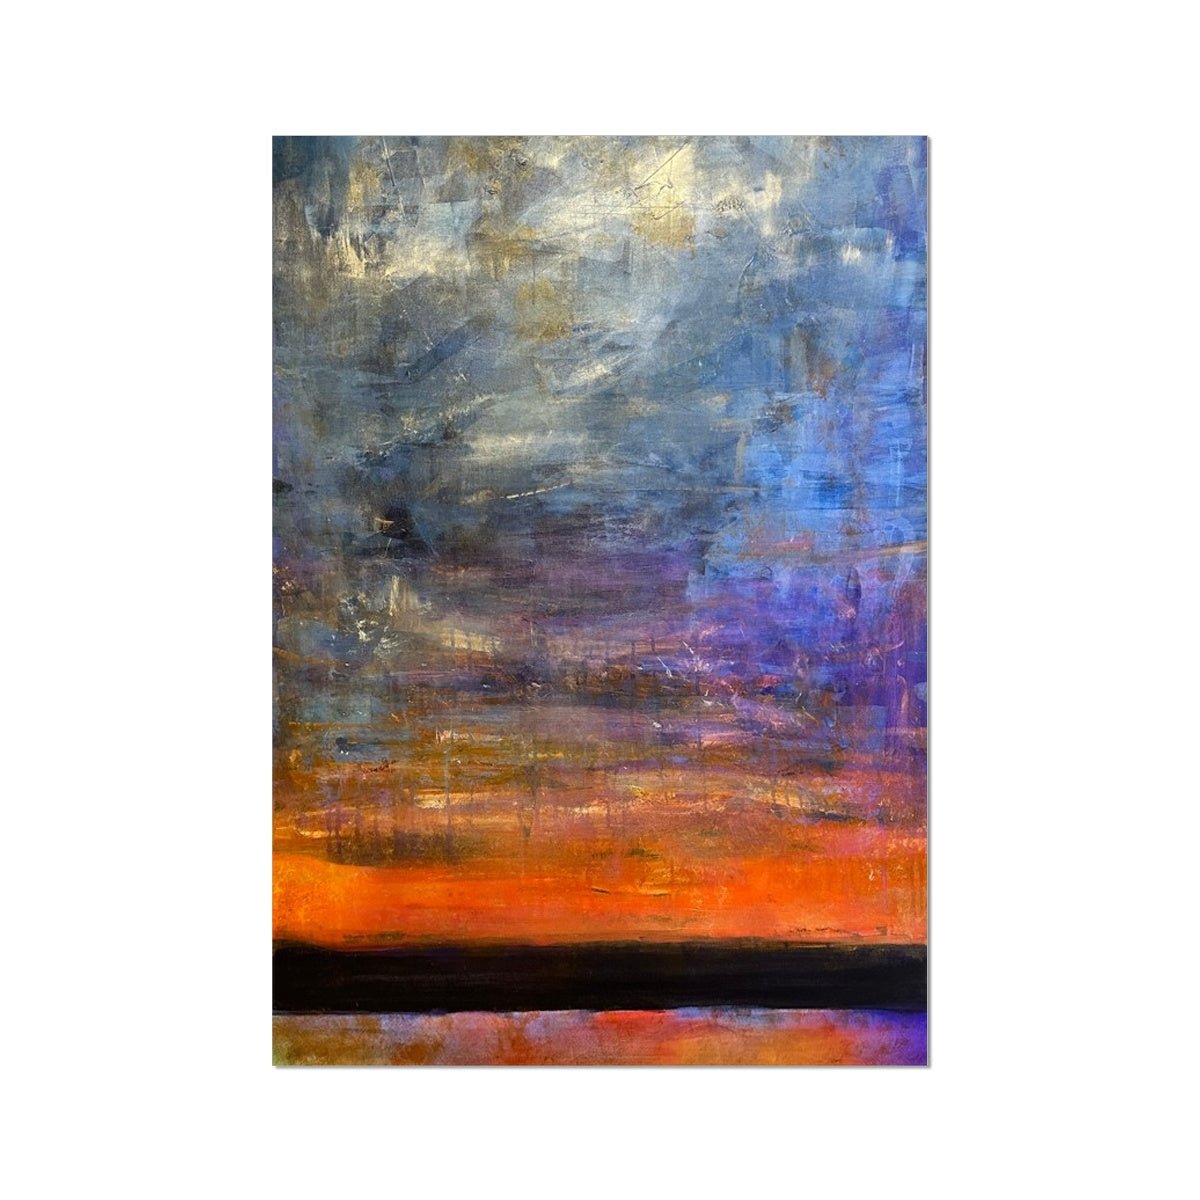 Horizon Dreams Abstract Painting | Fine Art Prints From Scotland-Unframed Prints-Abstract & Impressionistic Art Gallery-A2 Portrait-Paintings, Prints, Homeware, Art Gifts From Scotland By Scottish Artist Kevin Hunter